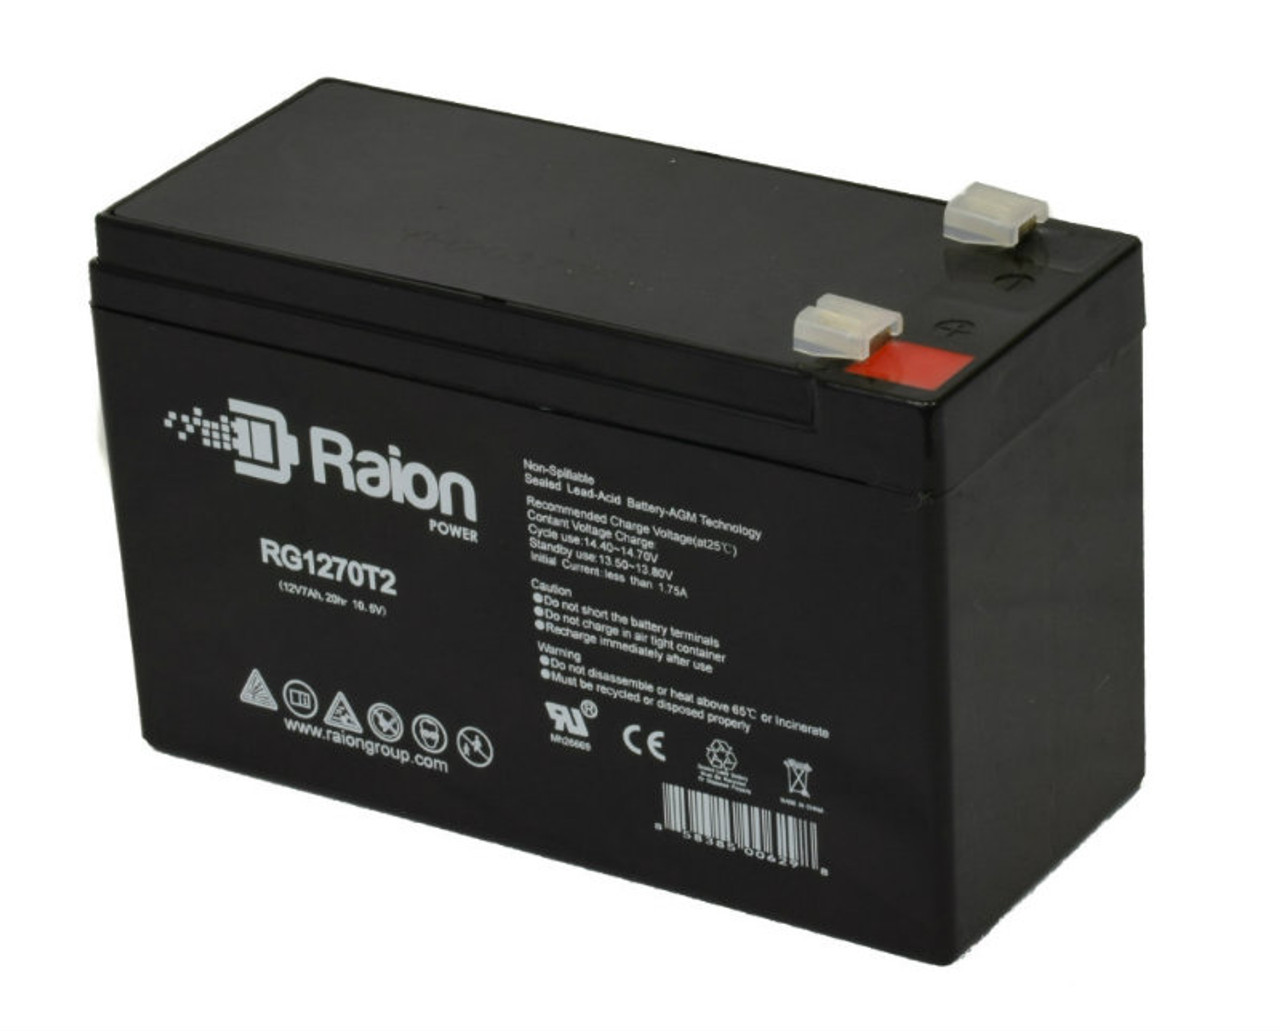 Raion Power Replacement 12V 7Ah RG1270T1 Fire Alarm Battery for Altronix AL100UL